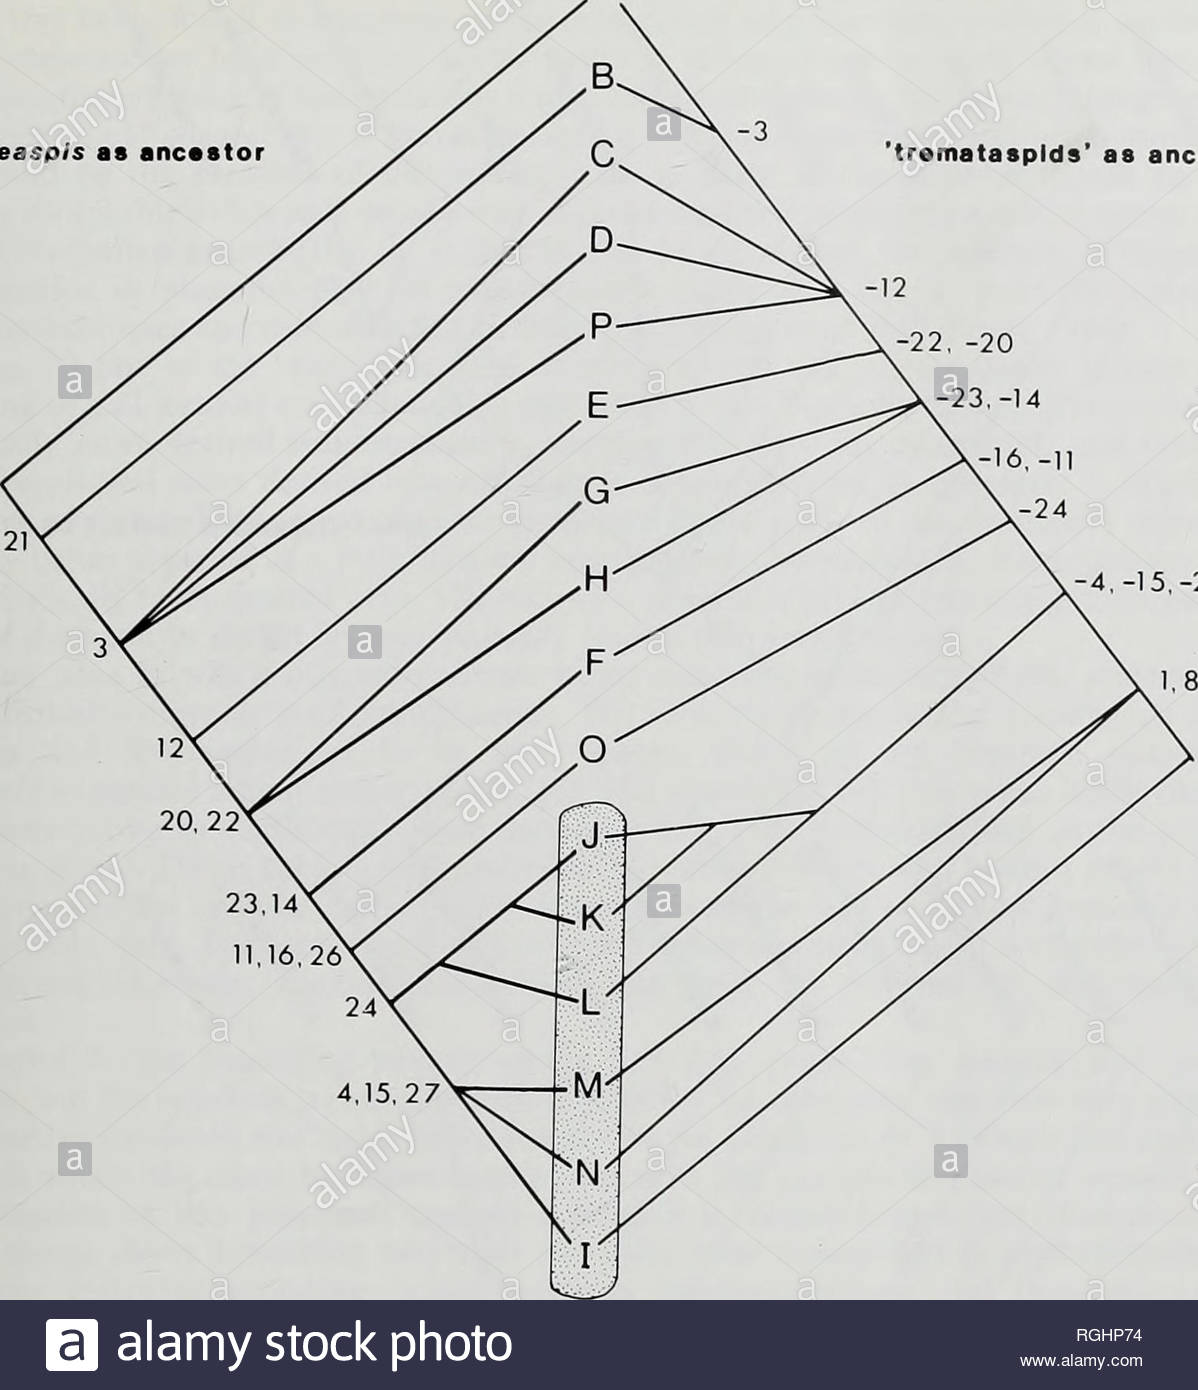 Consensus Tree Different Topography